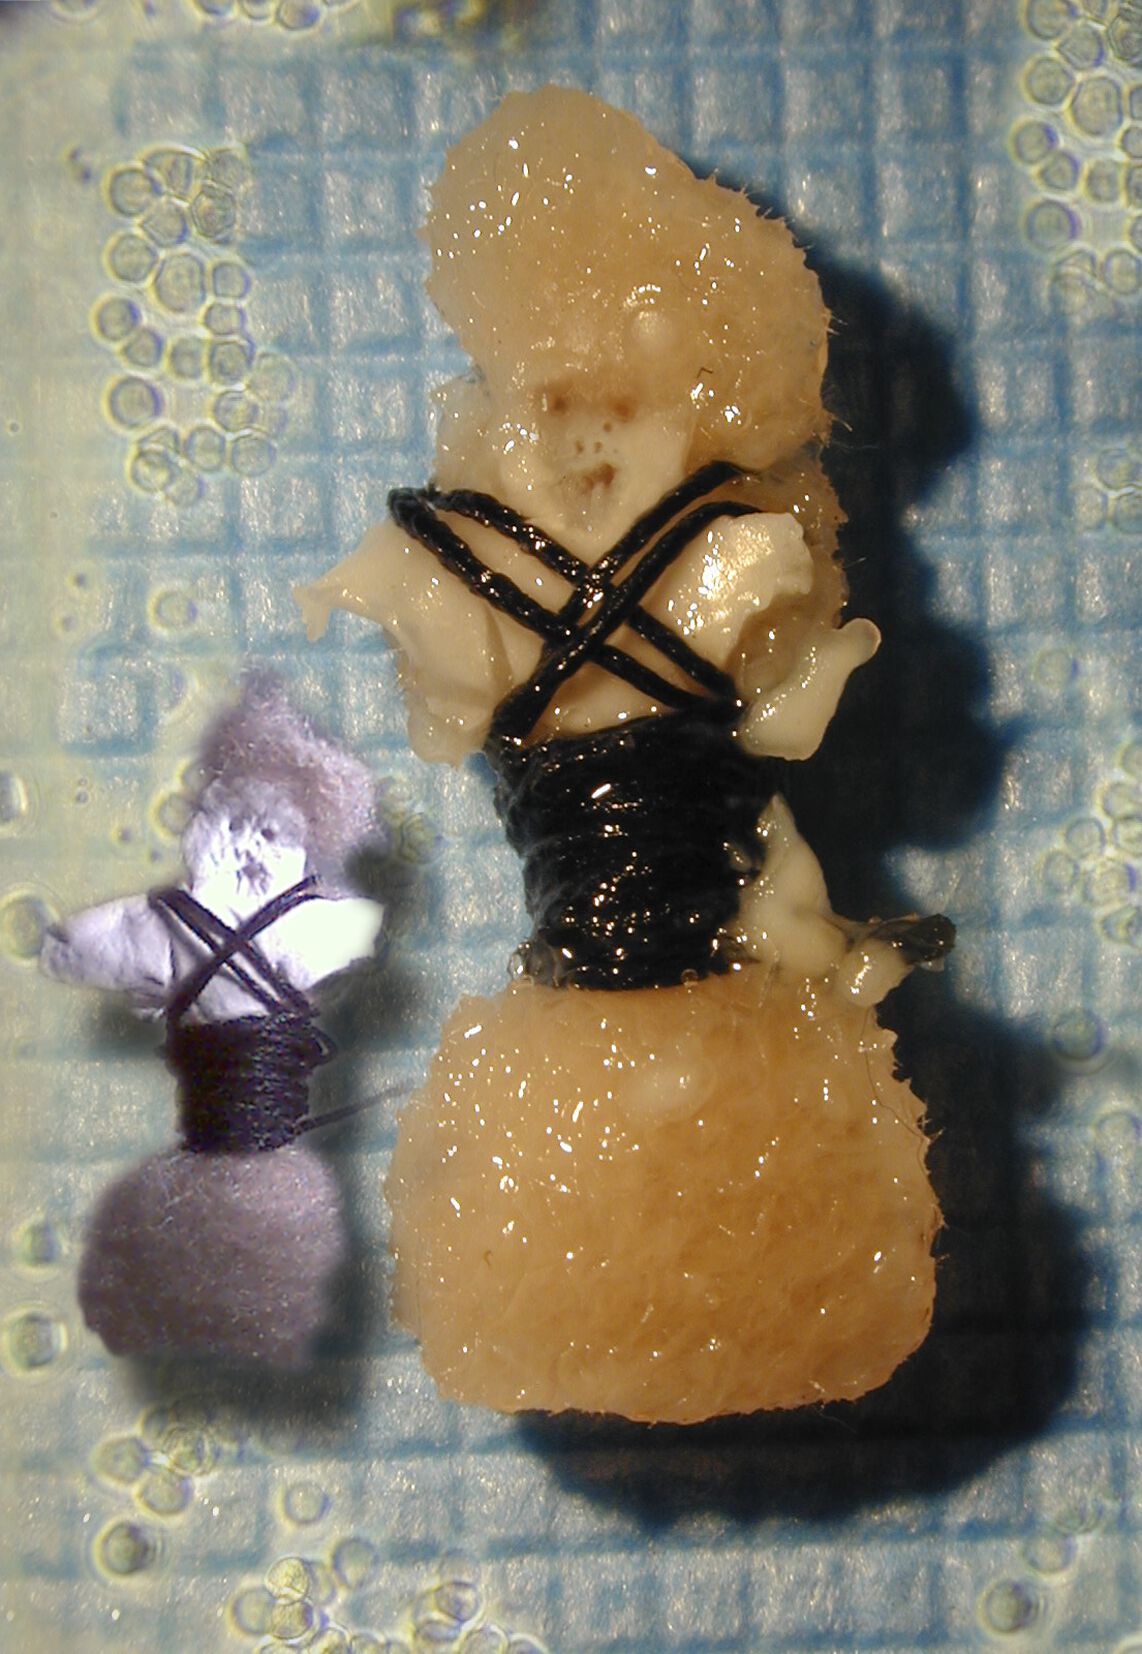 A worry doll made from wet biological tissue alongside a reference picture of what an actual worry doll is supposed to look like